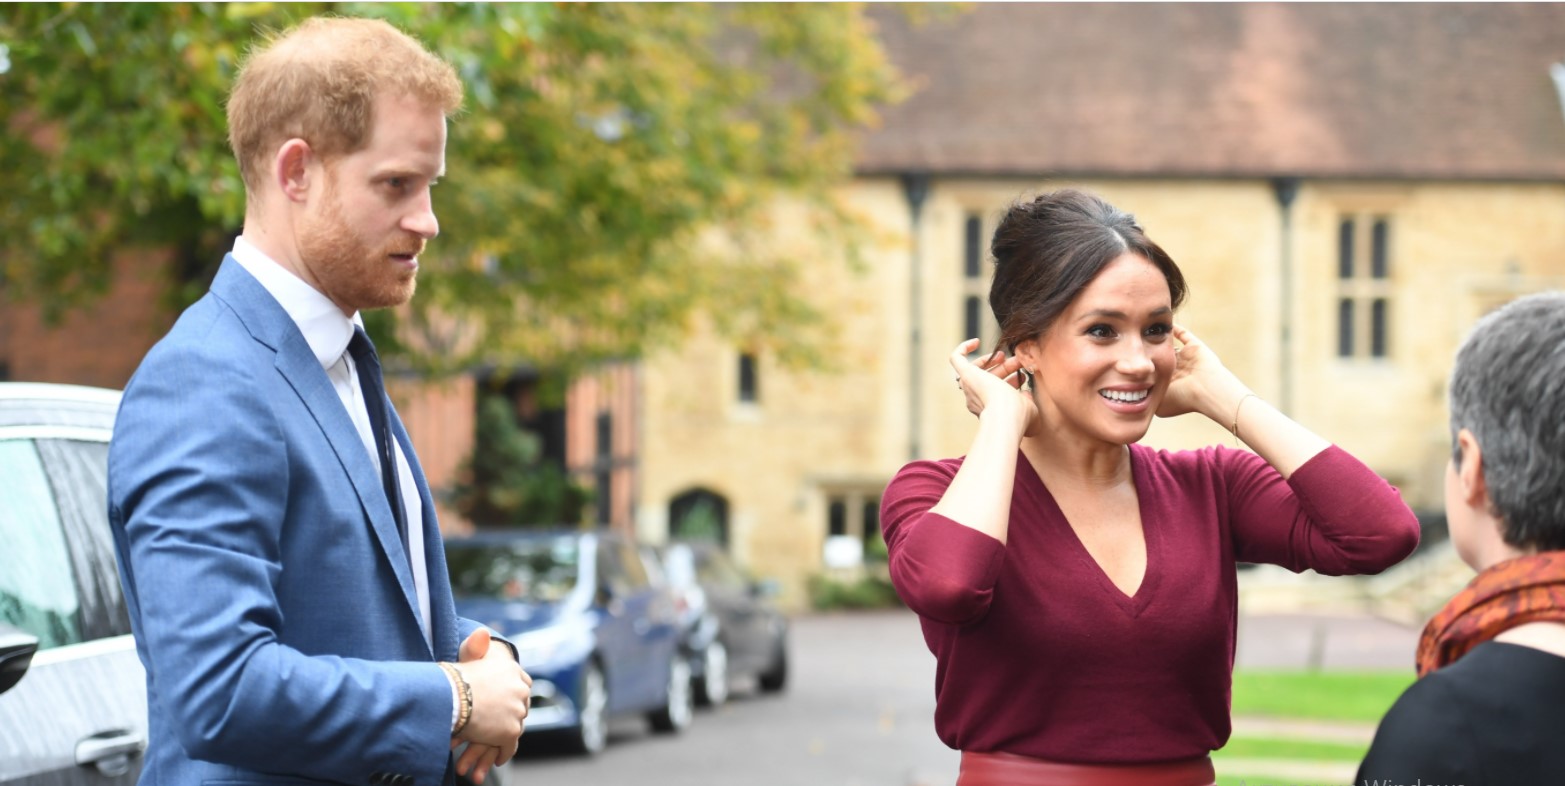 Los Angeles authorities accuse Prince Harry and Meghan Markle of squandering 